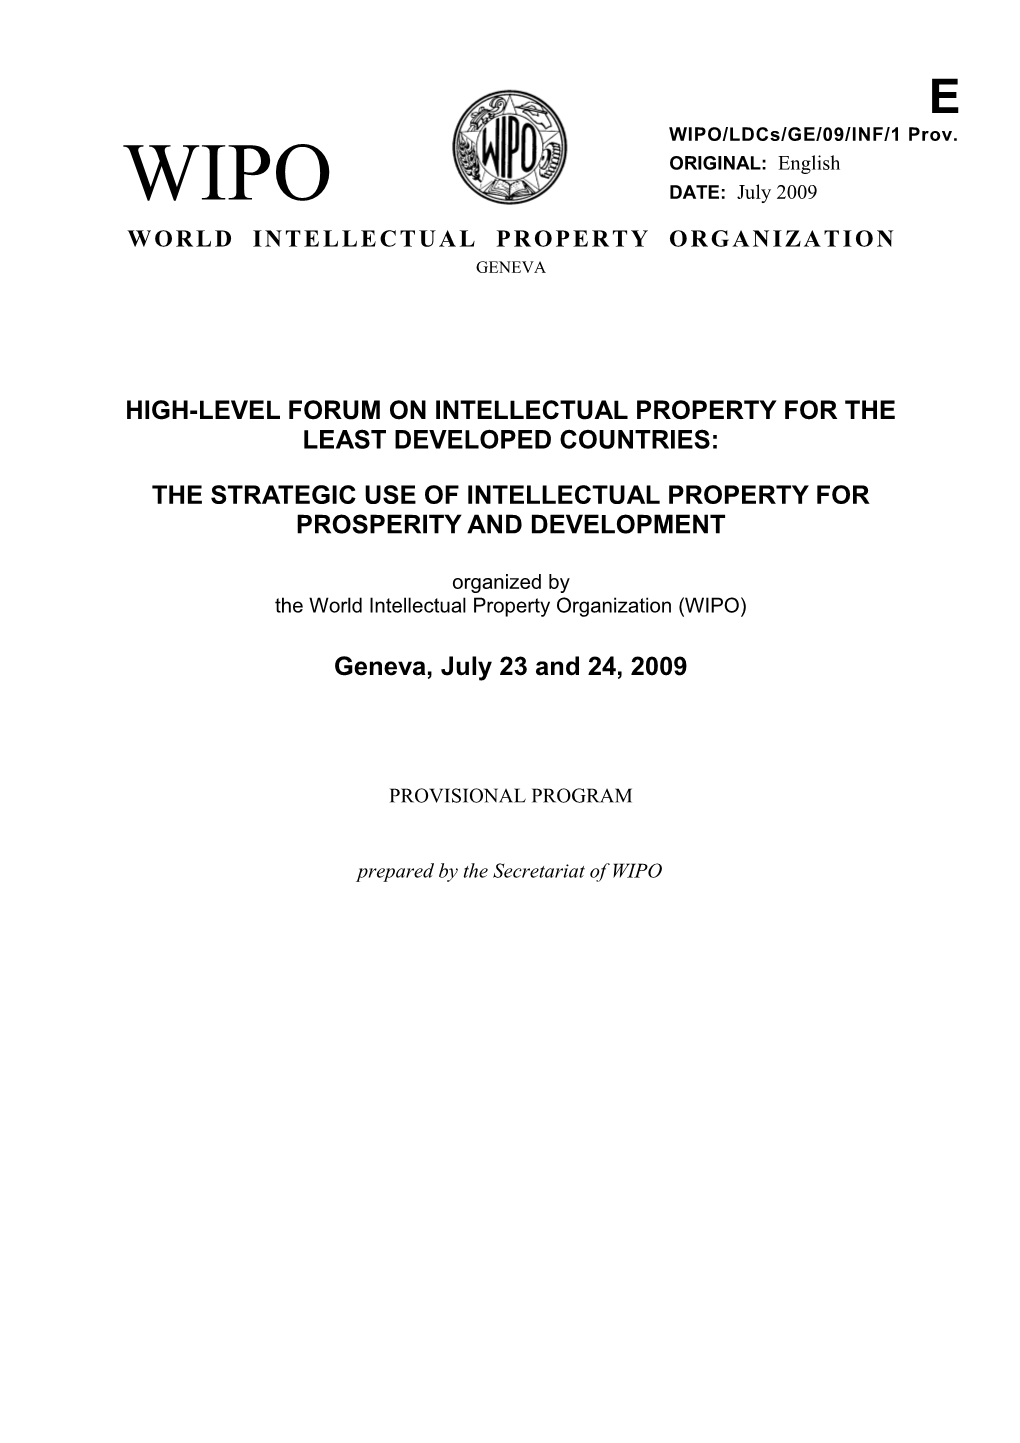 High-Level Forum on Intellectual Property for the LEAST DEVELOPED COUNTRIES